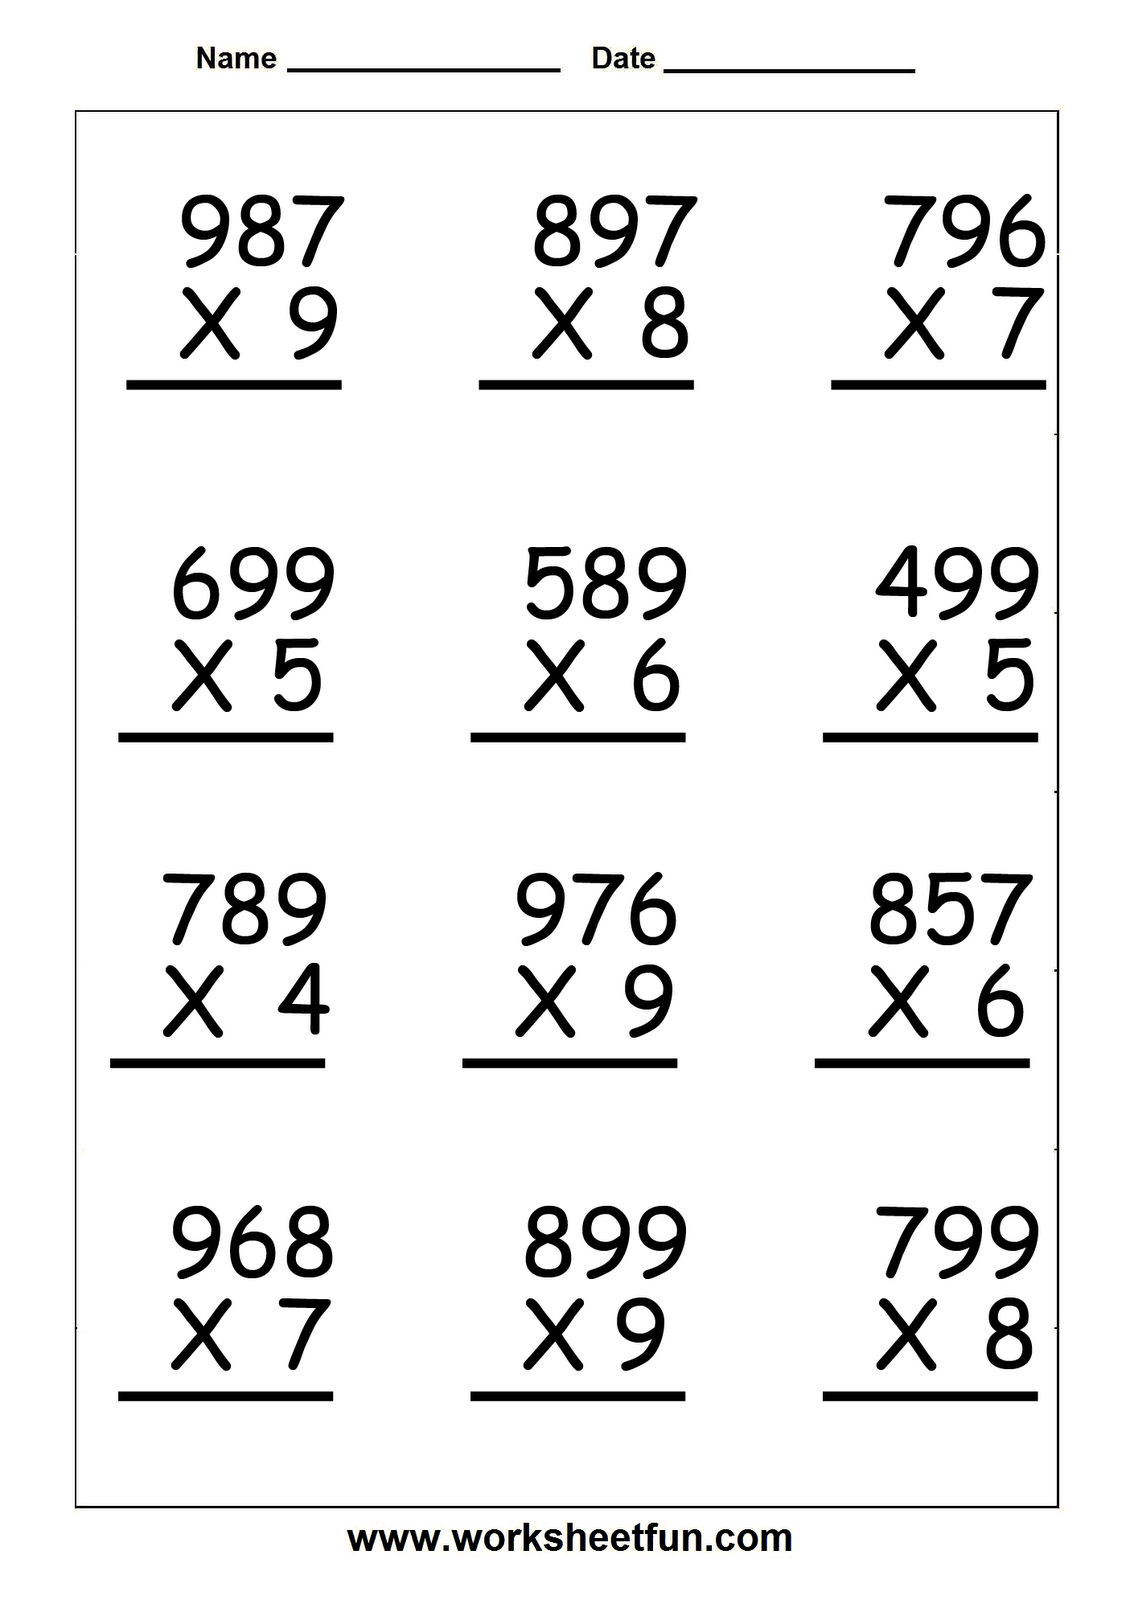 Multiplication Worksheets For 5Th Grade In 2020 | Free